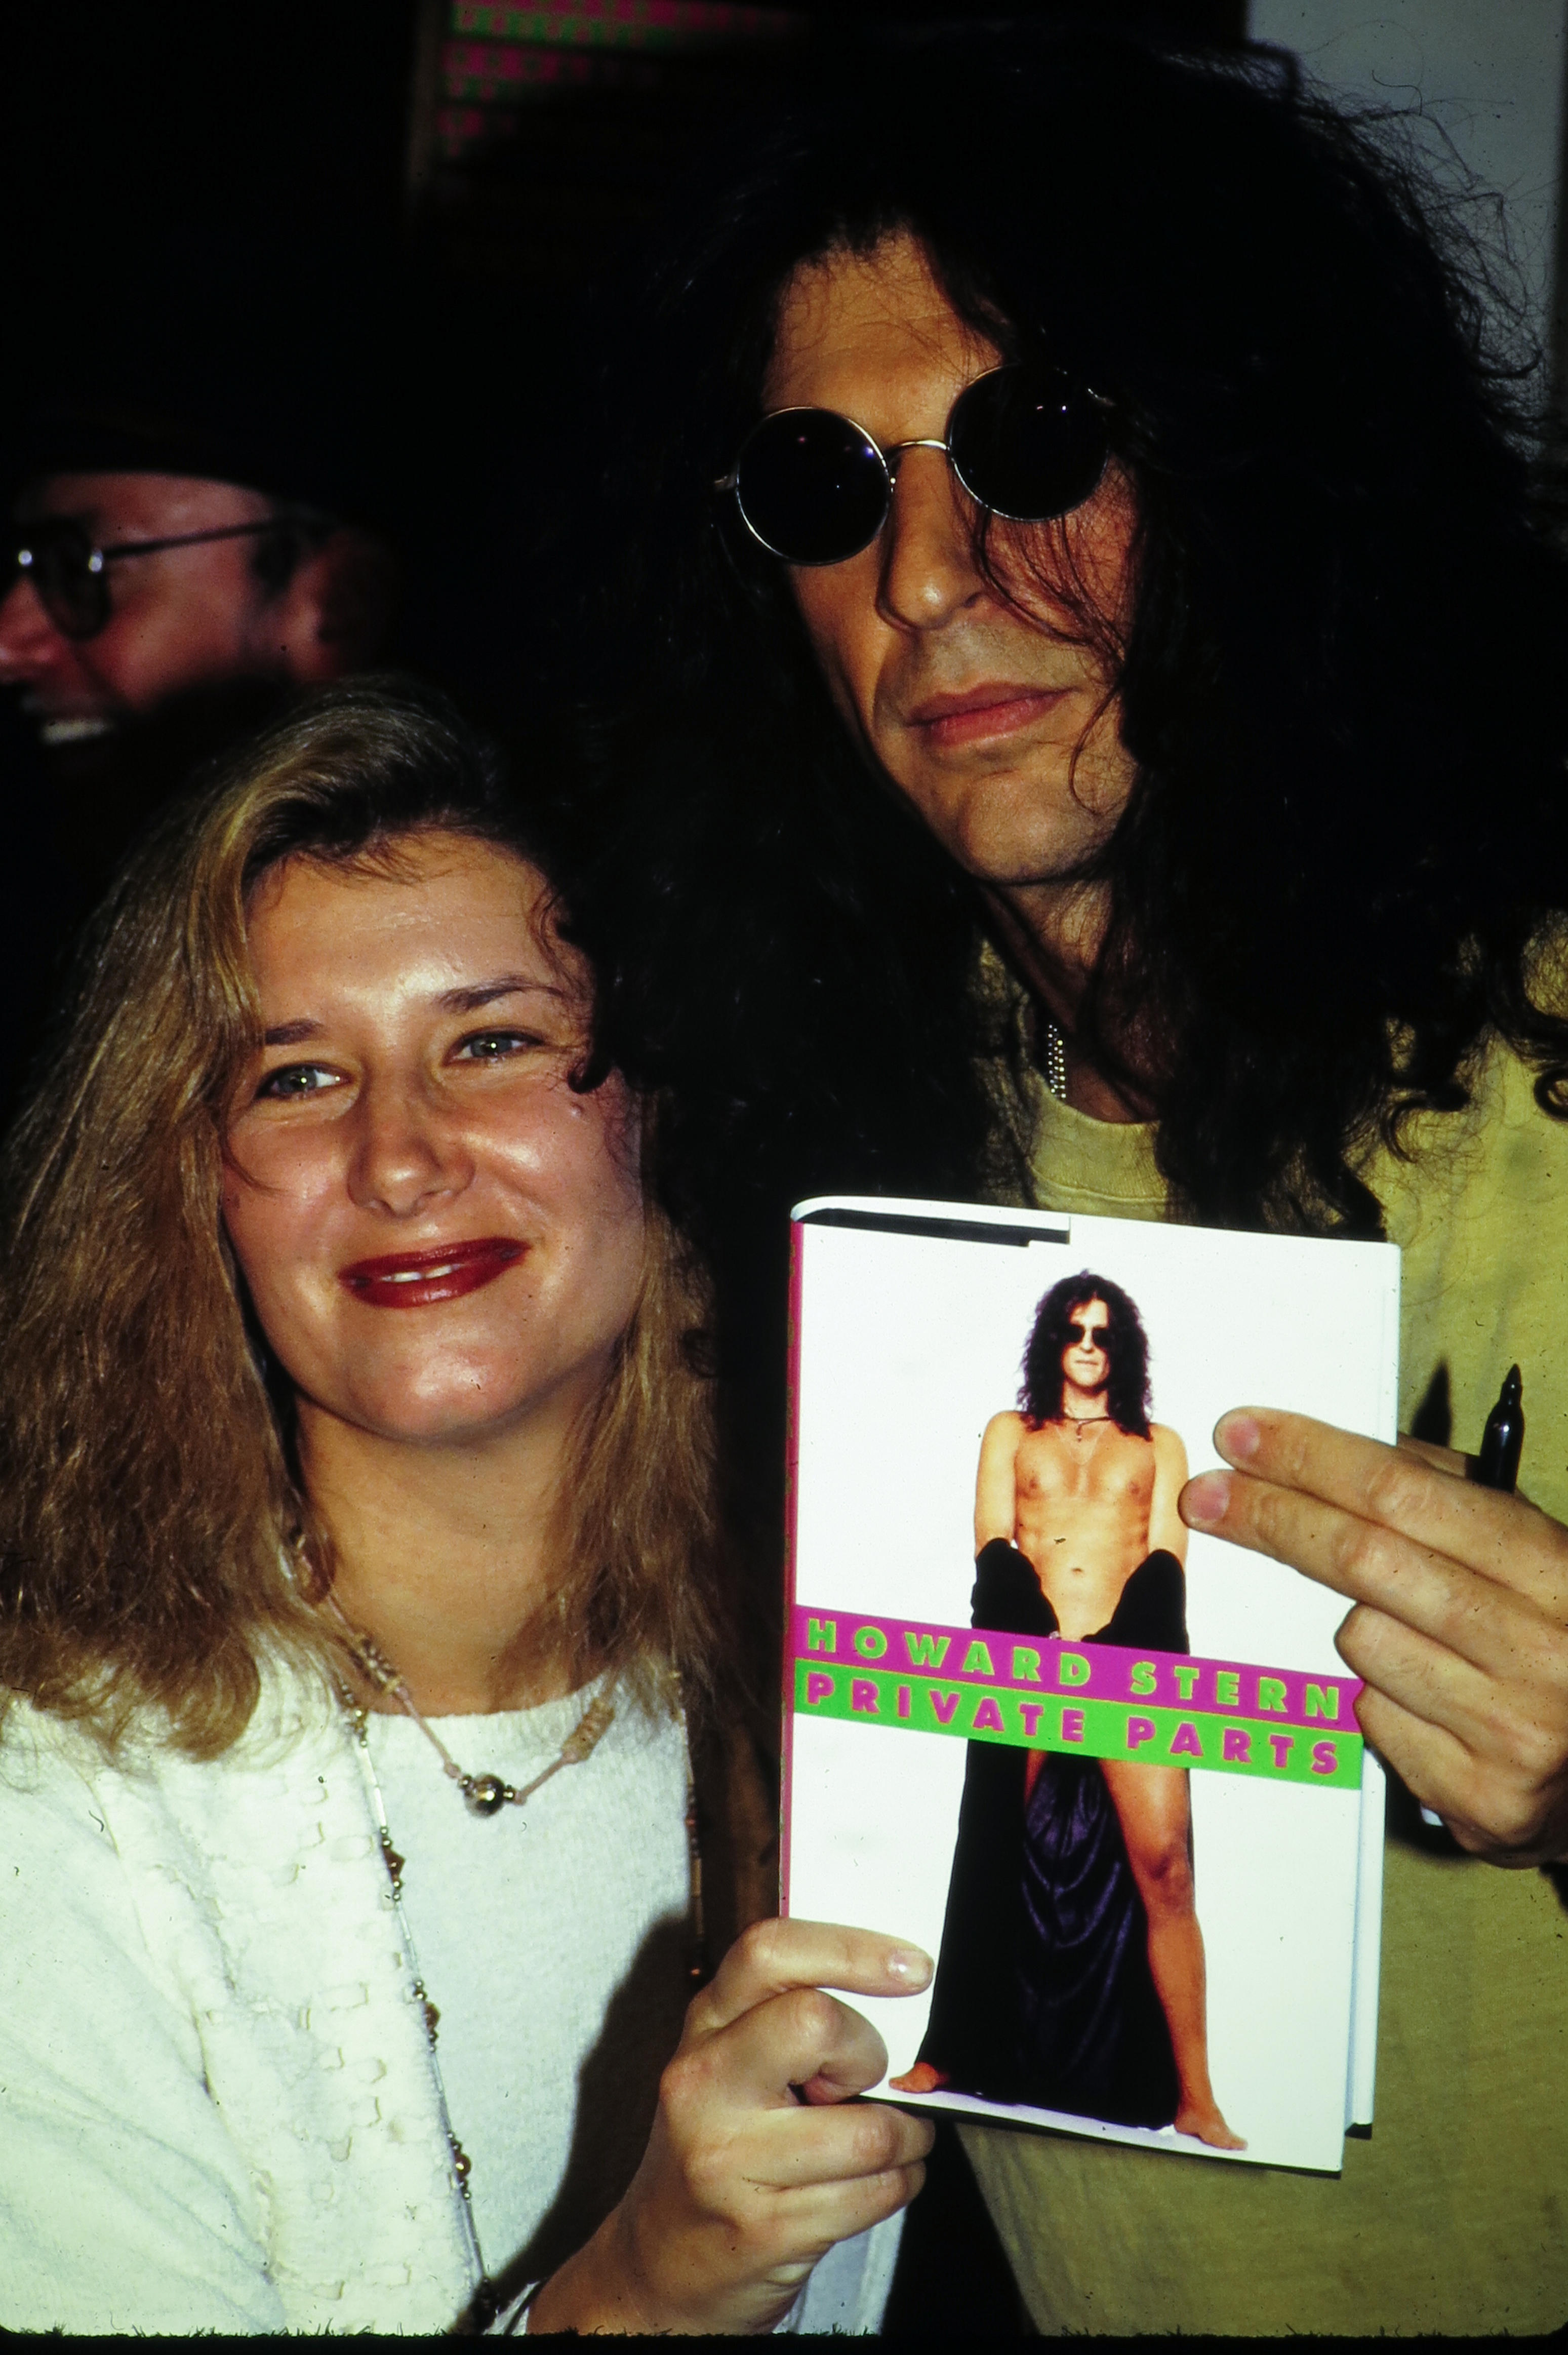 Alison and Howard Stern at his book signing for "Private Parts" at Barnes and Noble in New York, on October 14, 1993 | Source: Getty Images